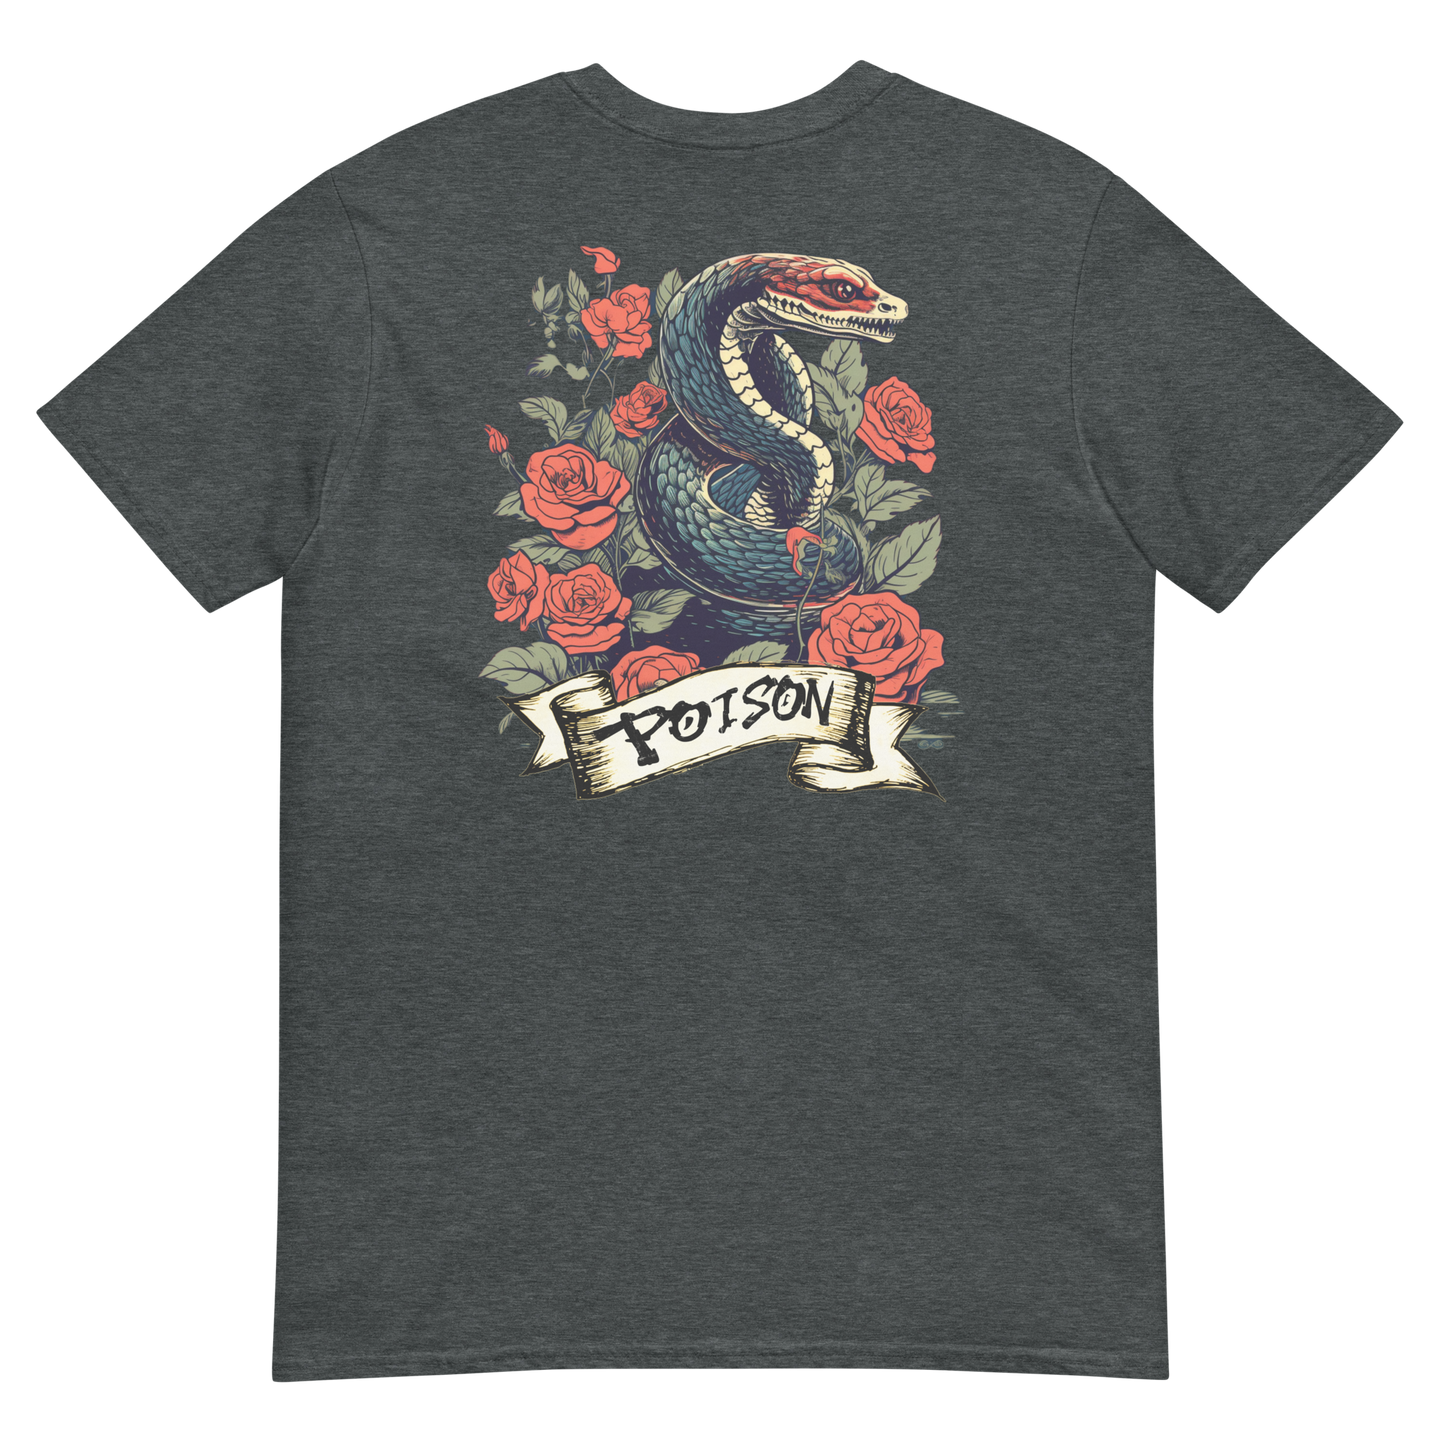 Poison  Graphic T-Shirt, Premium Graphic Tees, Cool Design T Shirts,  Streetwear Casual Summer Tops T-Shirt Unisex